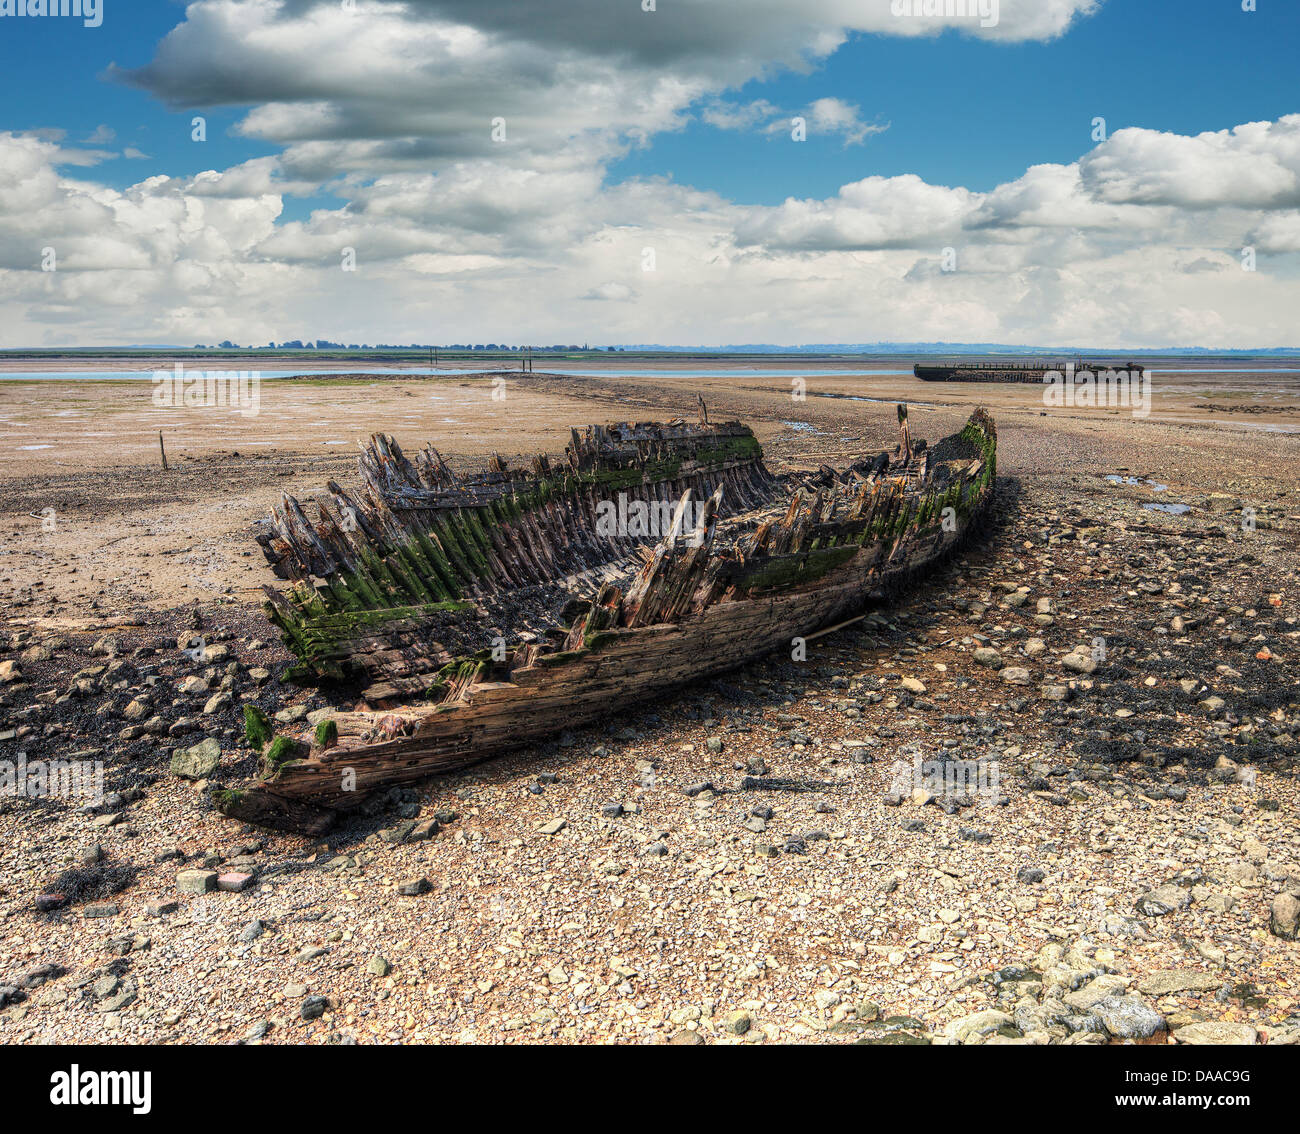 Shipwrecks at Elmley Reach, The Swale. (Possibly WW2 wooden minesweepers.) Stock Photo